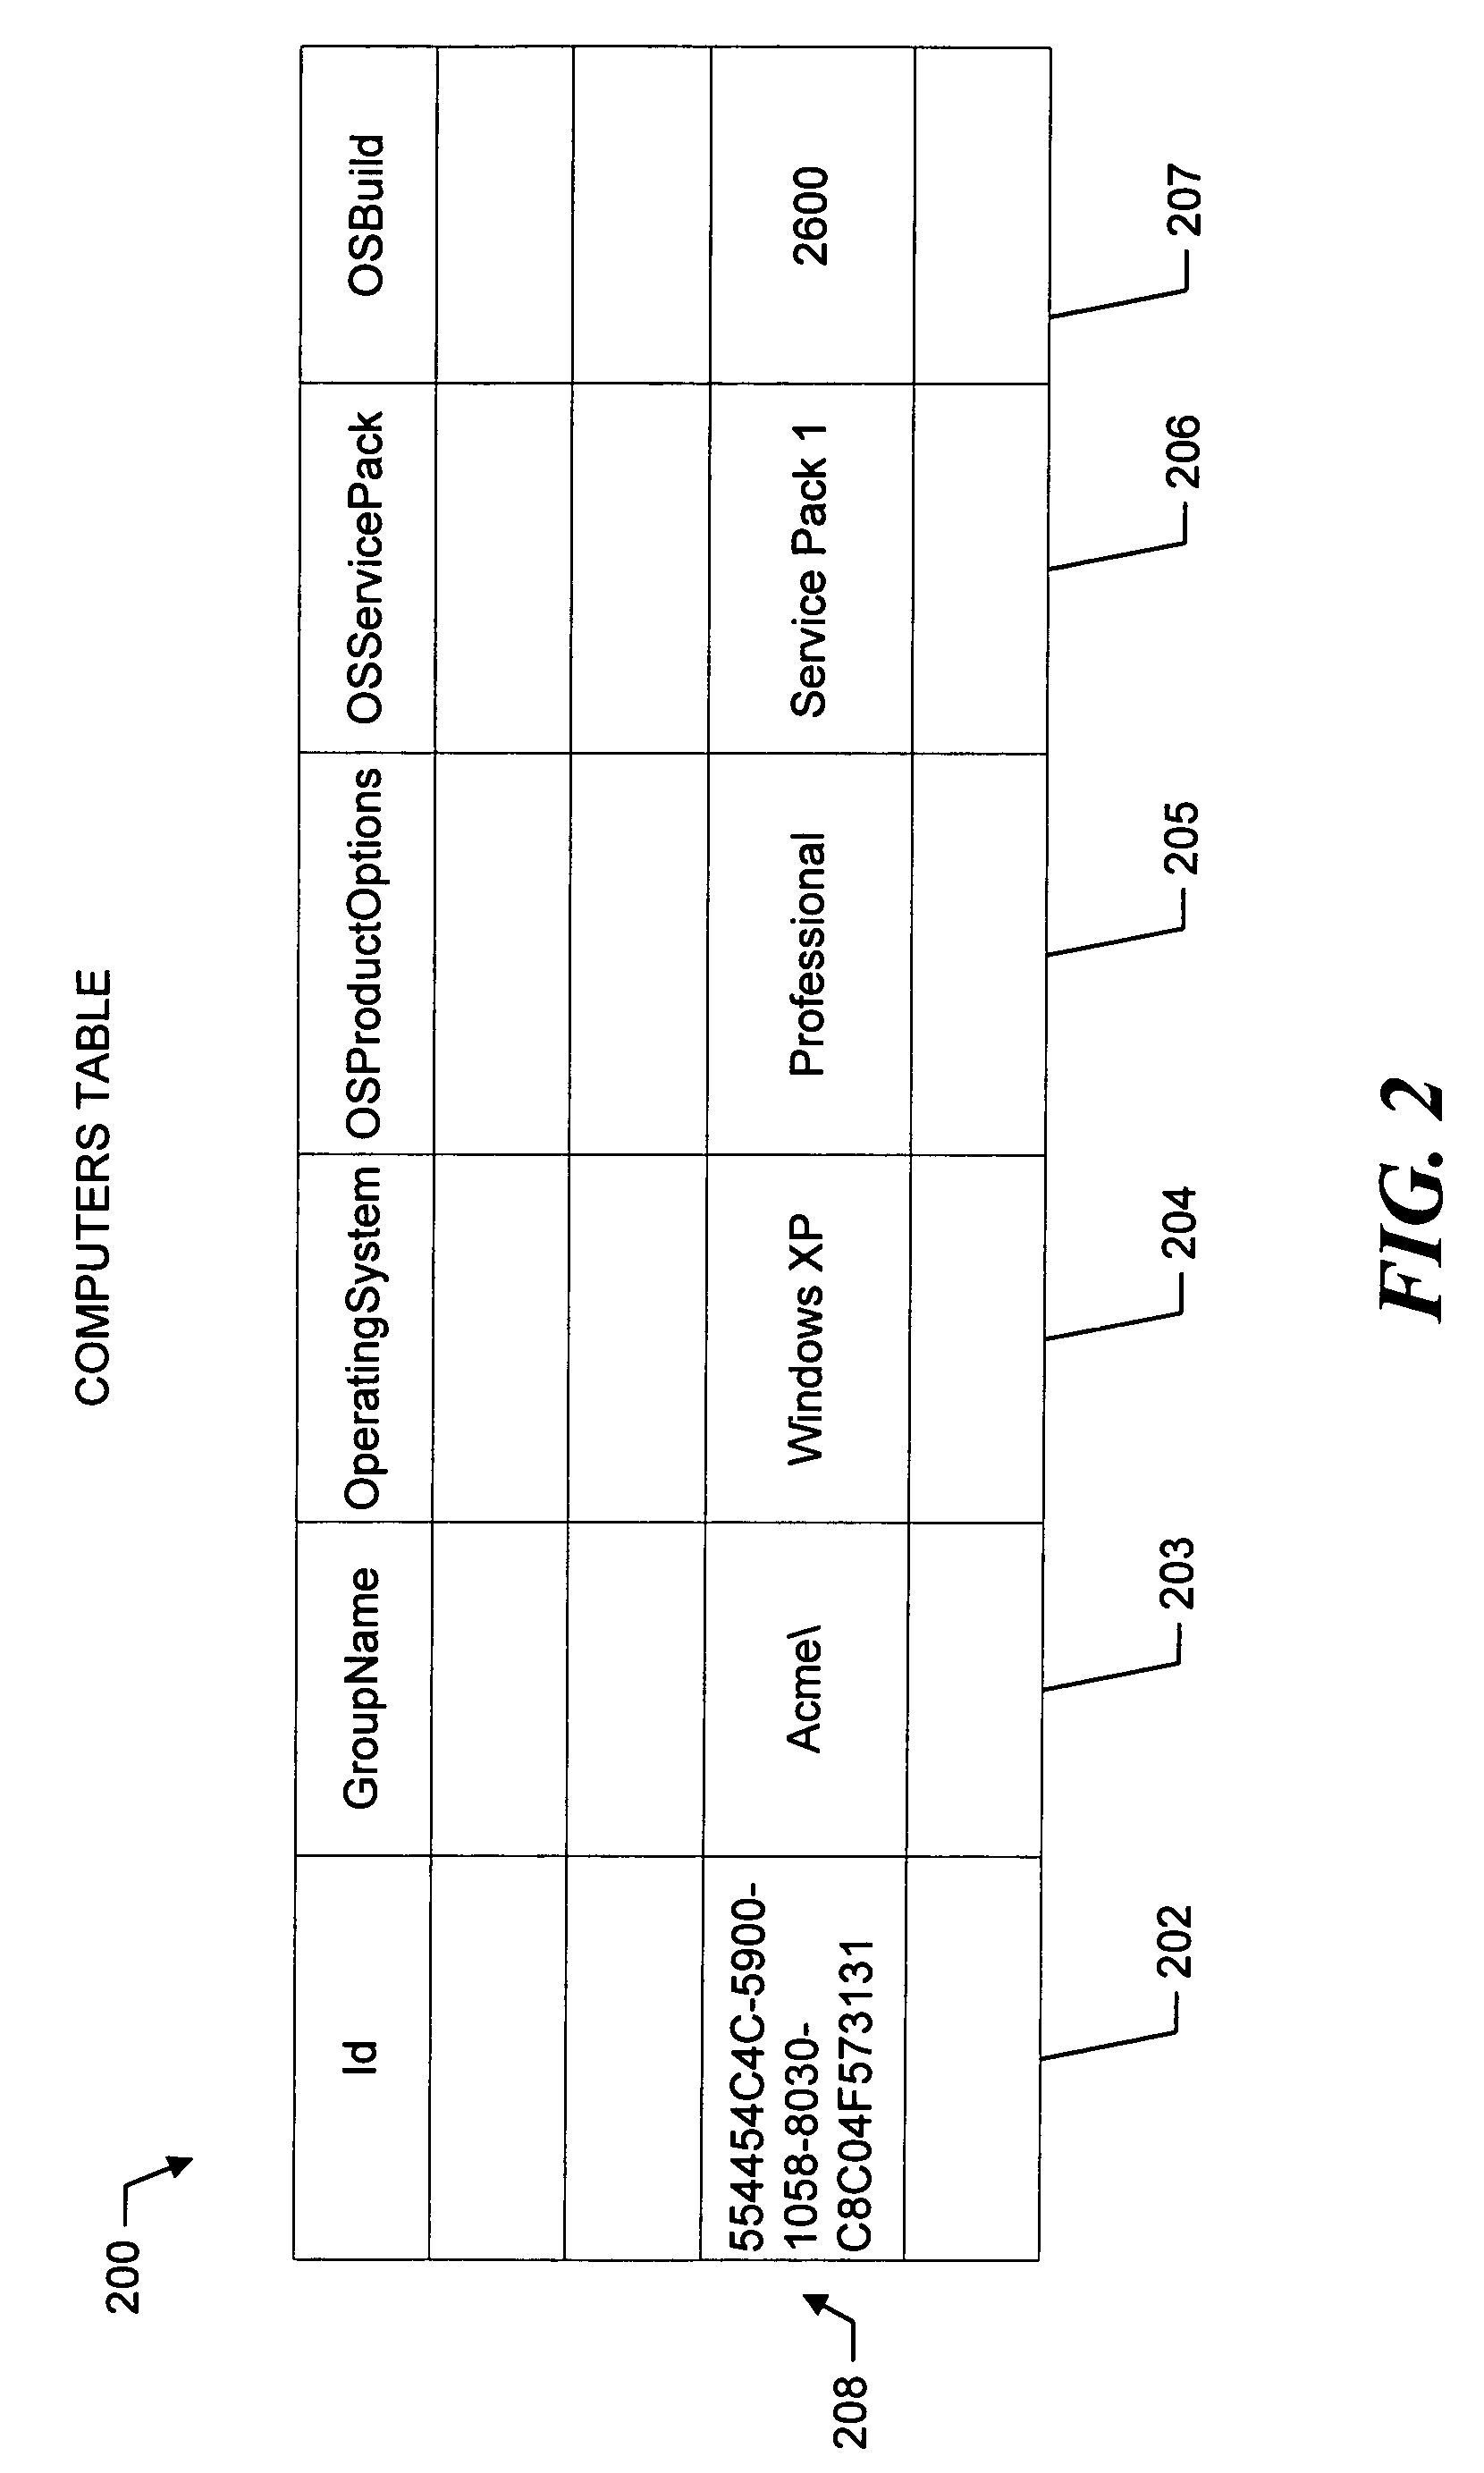 Software update and patch audit subsystem for use in a computer information database system